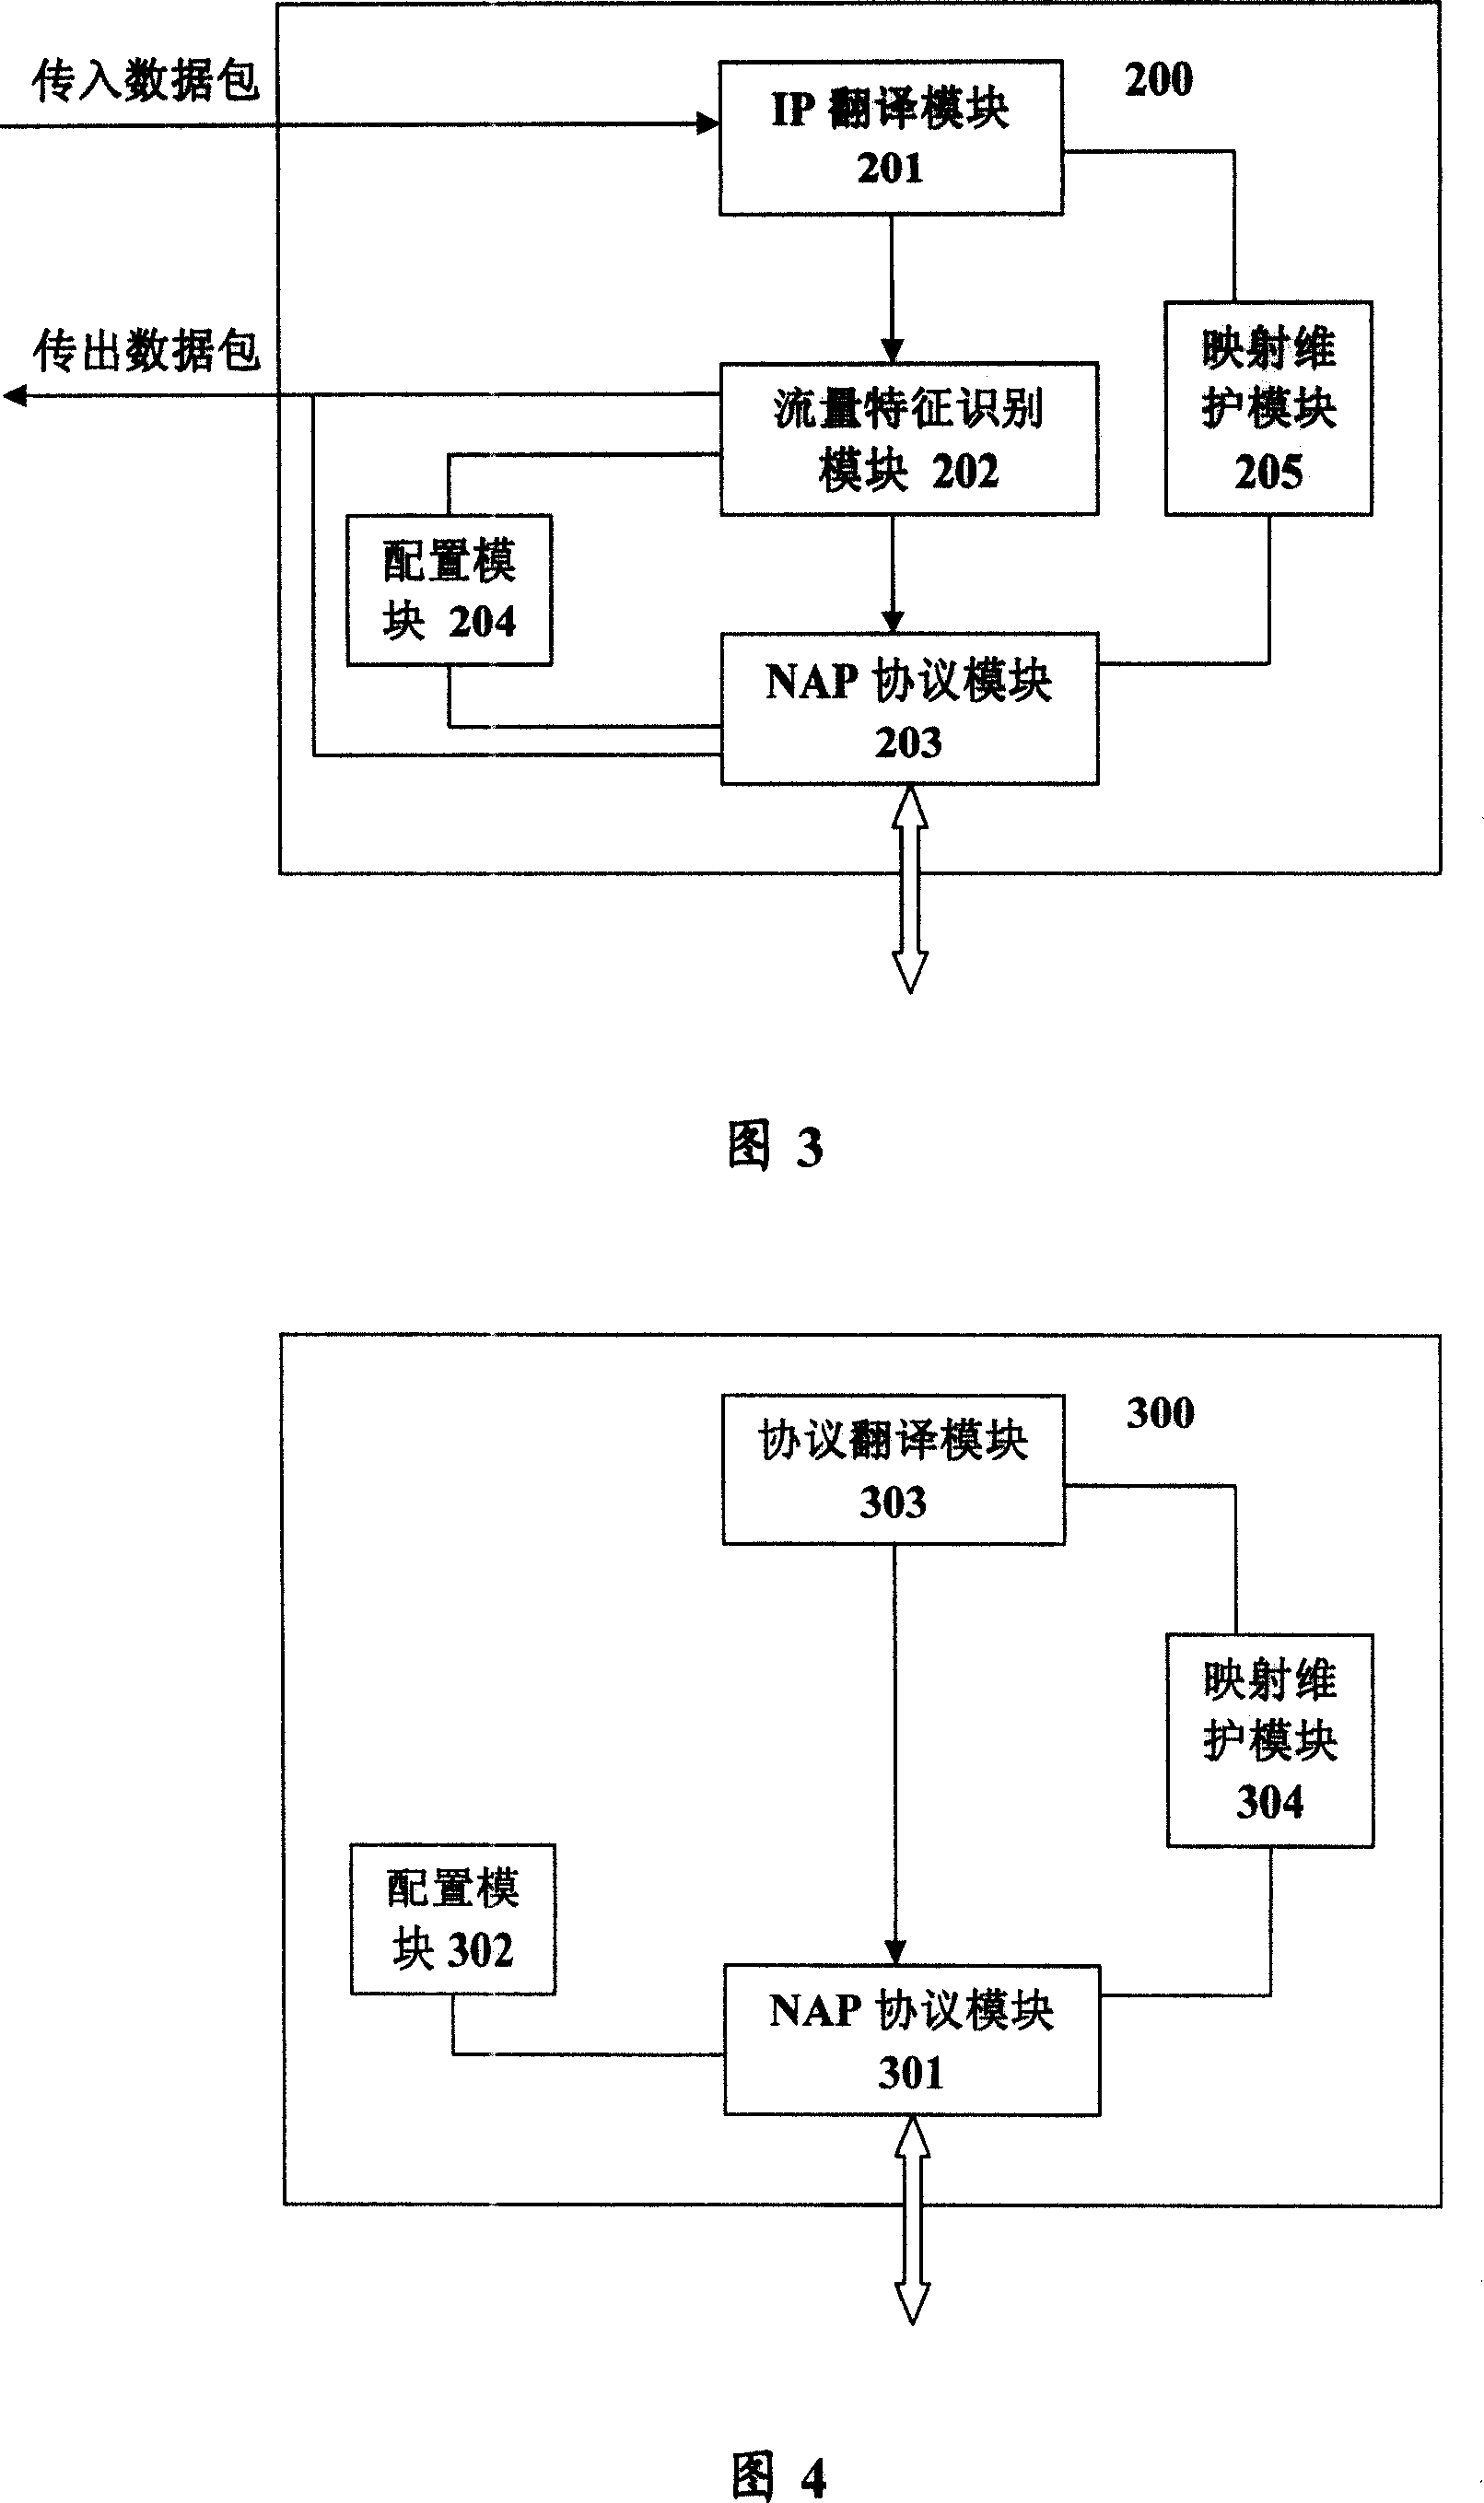 Network address and protocol translating equipment and application layer gateway equipment